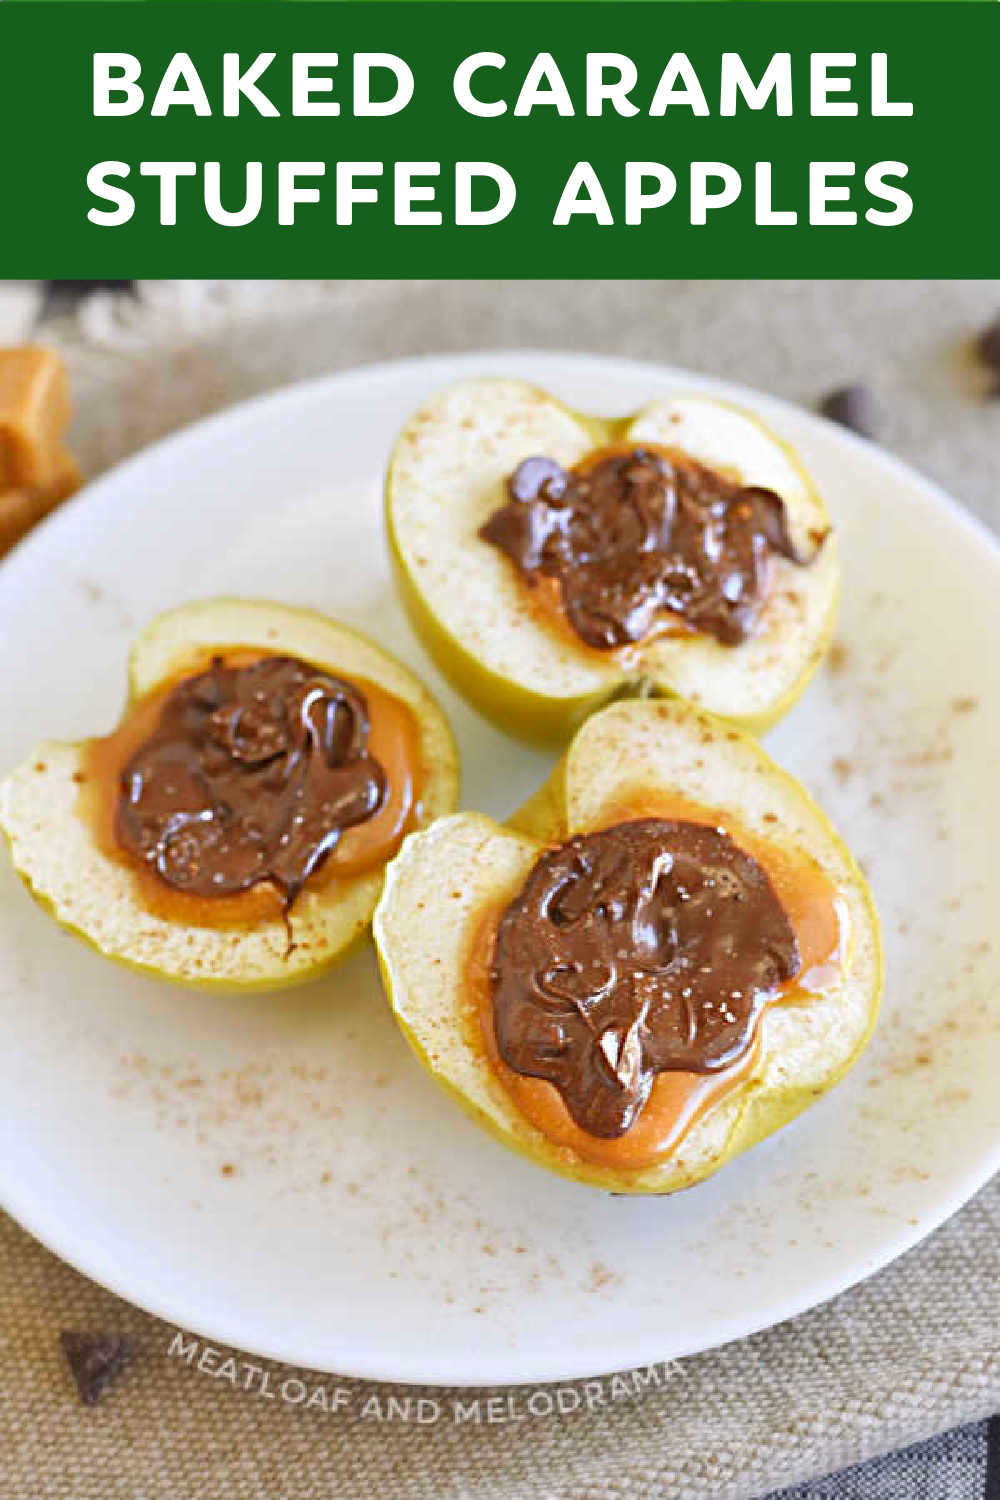 Baked Caramel Stuffed Apples are baked apples stuffed with caramel and topped with melted chocolate and cinnamon. Chocolate caramel apples are an easy fall dessert! via @meamel